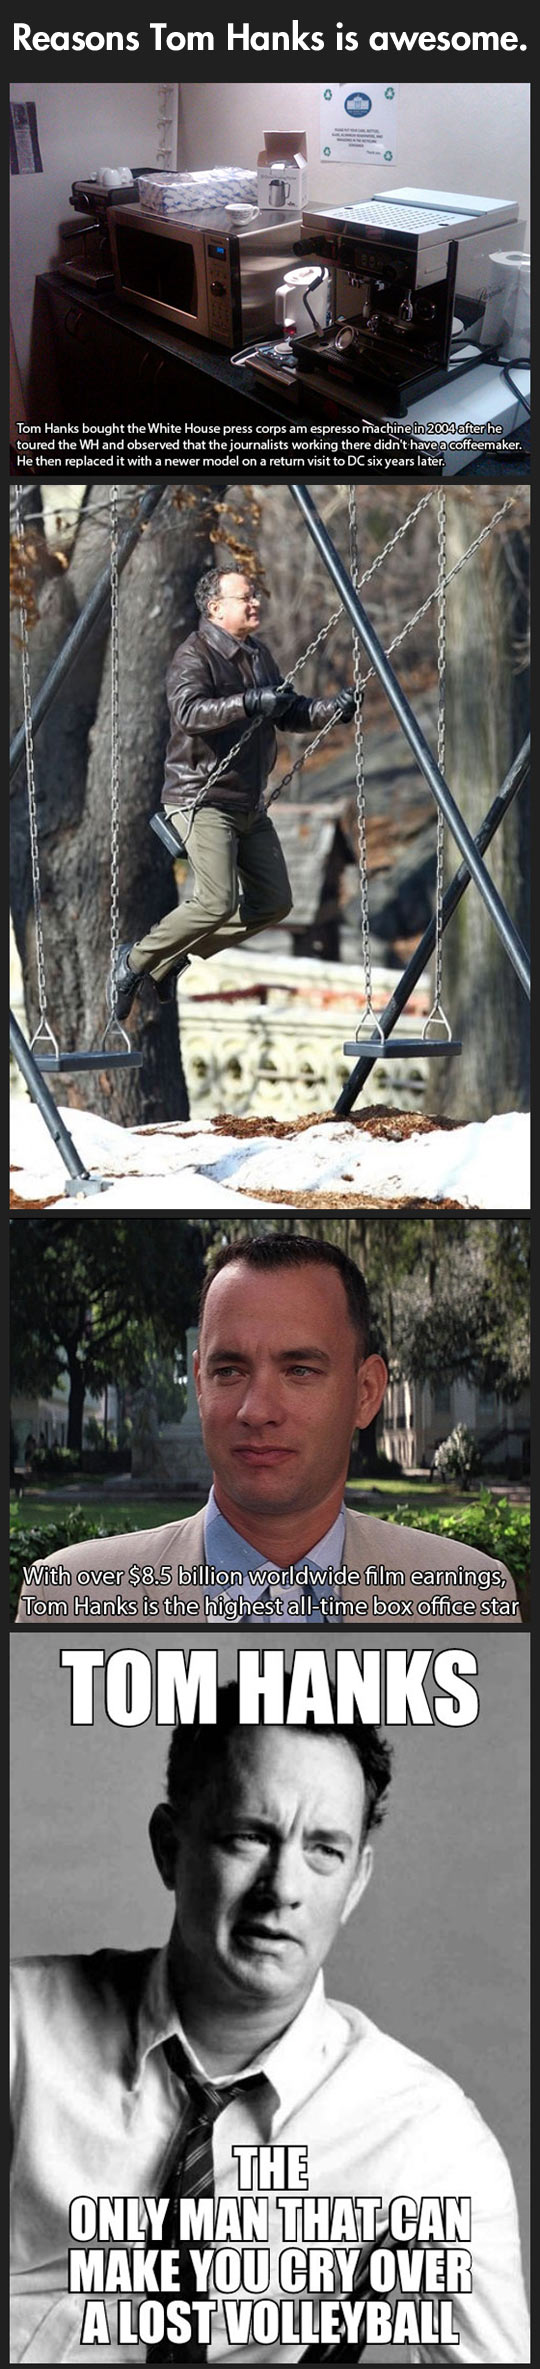 Why Tom Hanks is awesome.